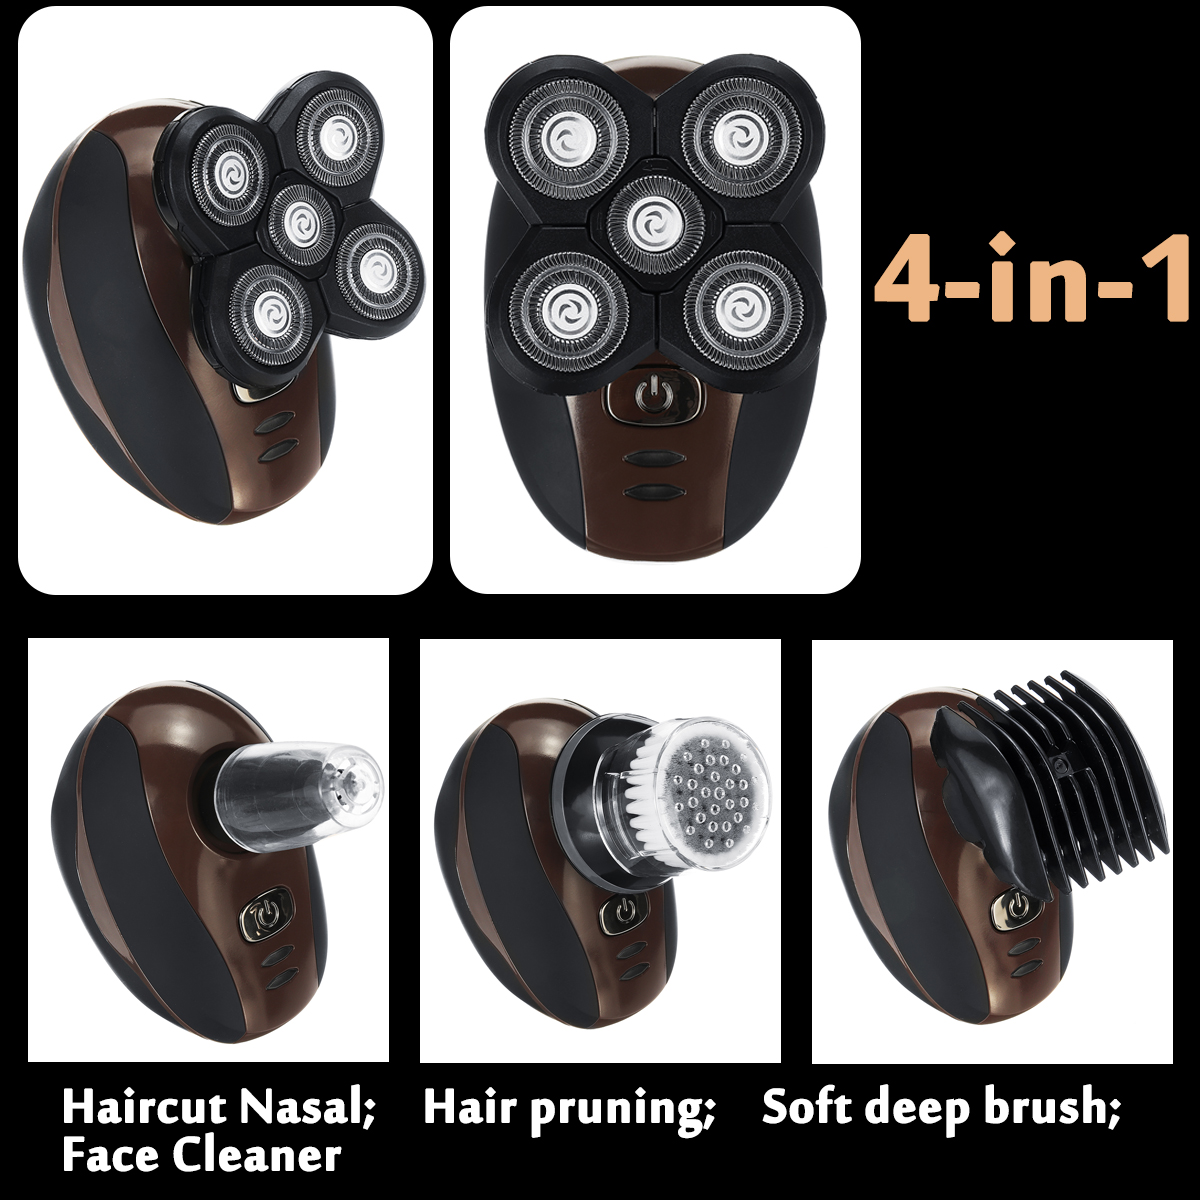 4-IN1-5-Head-Men-Cordless-Electric-Shaver-Razor-Bald-Clipper-Trimmer-USB-Rechargeable-1438085